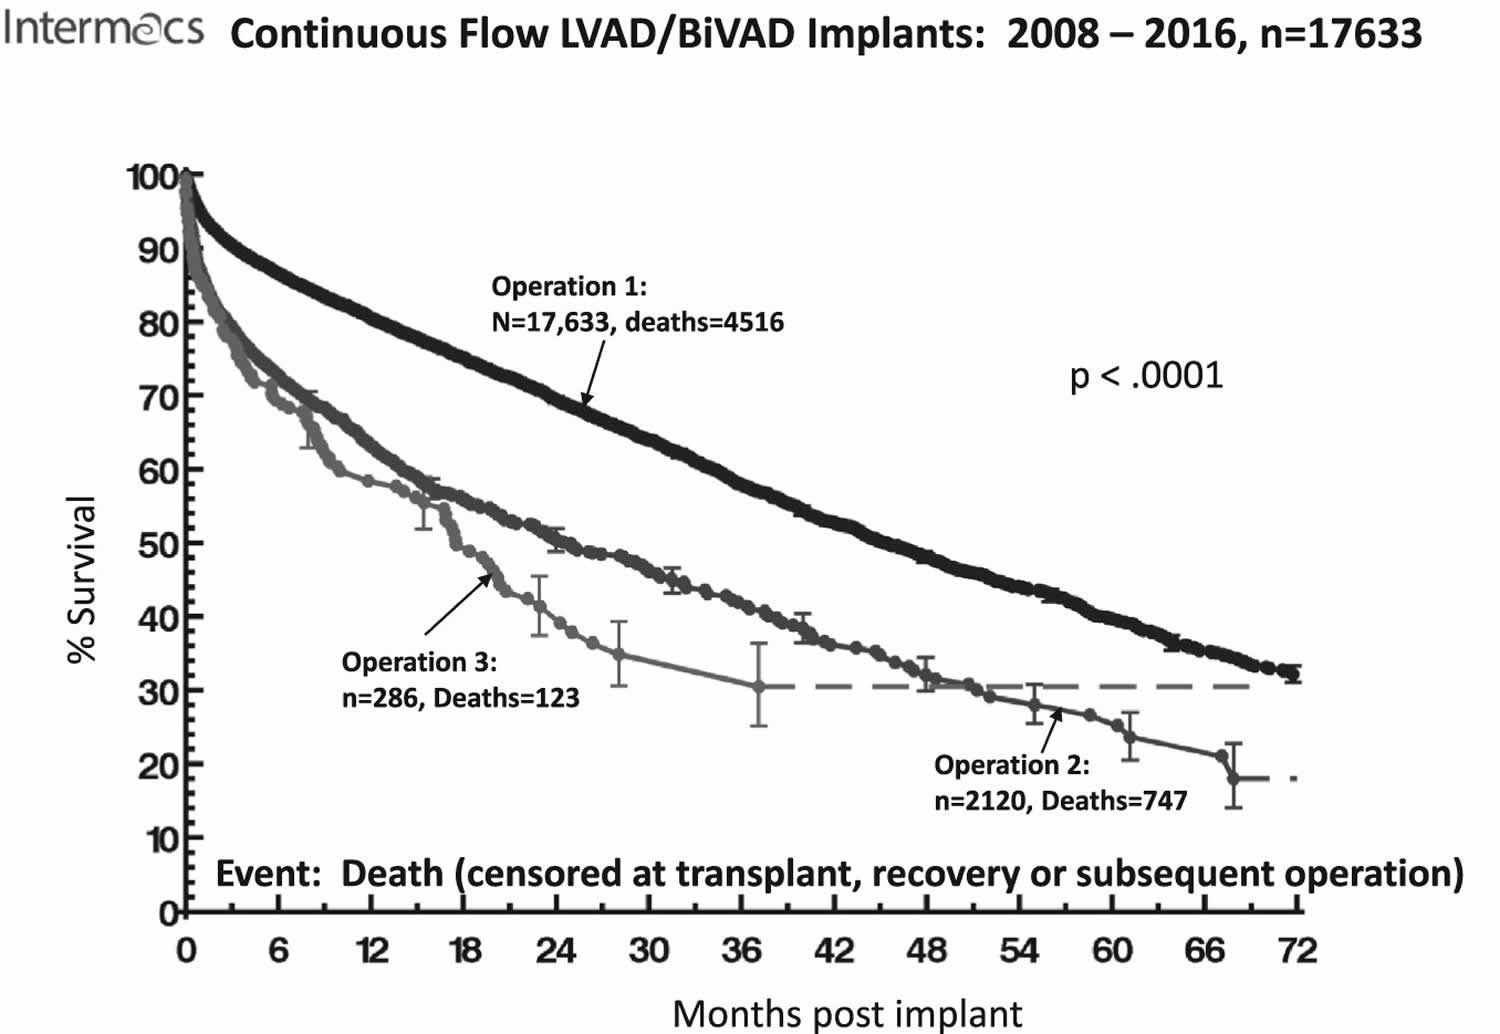 LVAD heart pump life expectancy according to pump replacement operation